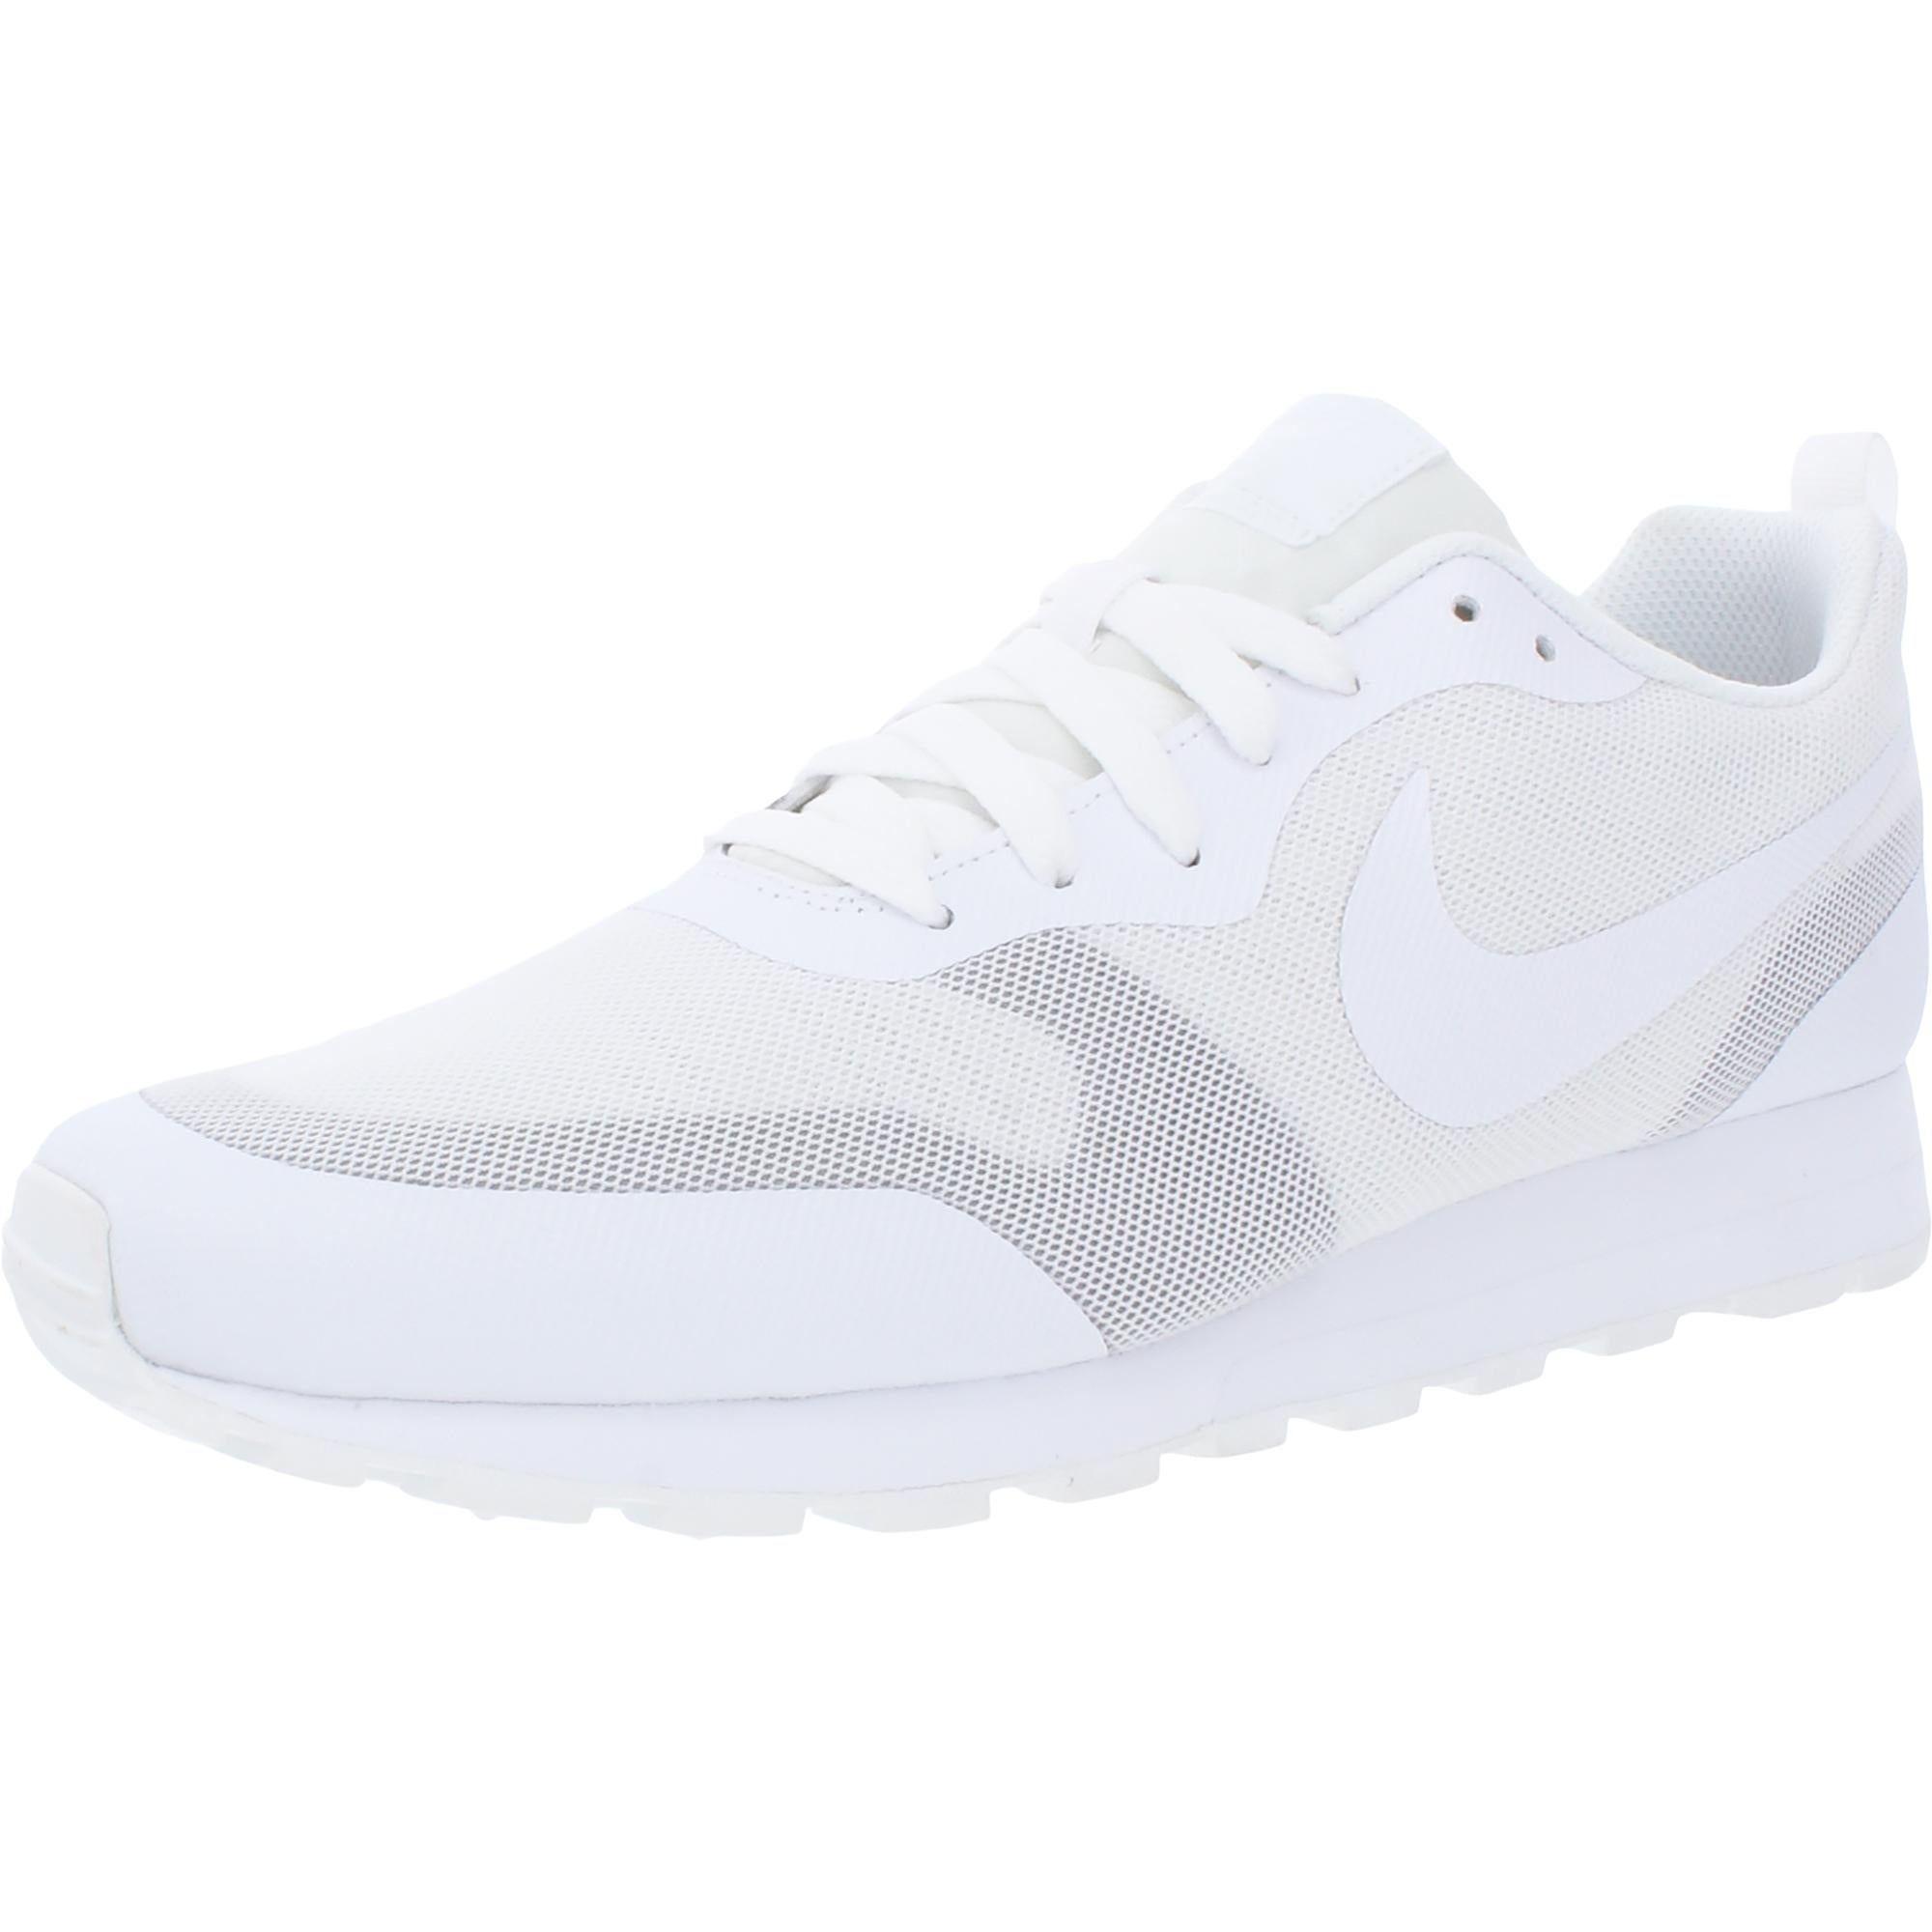 Nike MD 2 19 Mesh Lace-Up Athletic Running Sneakers burtfit